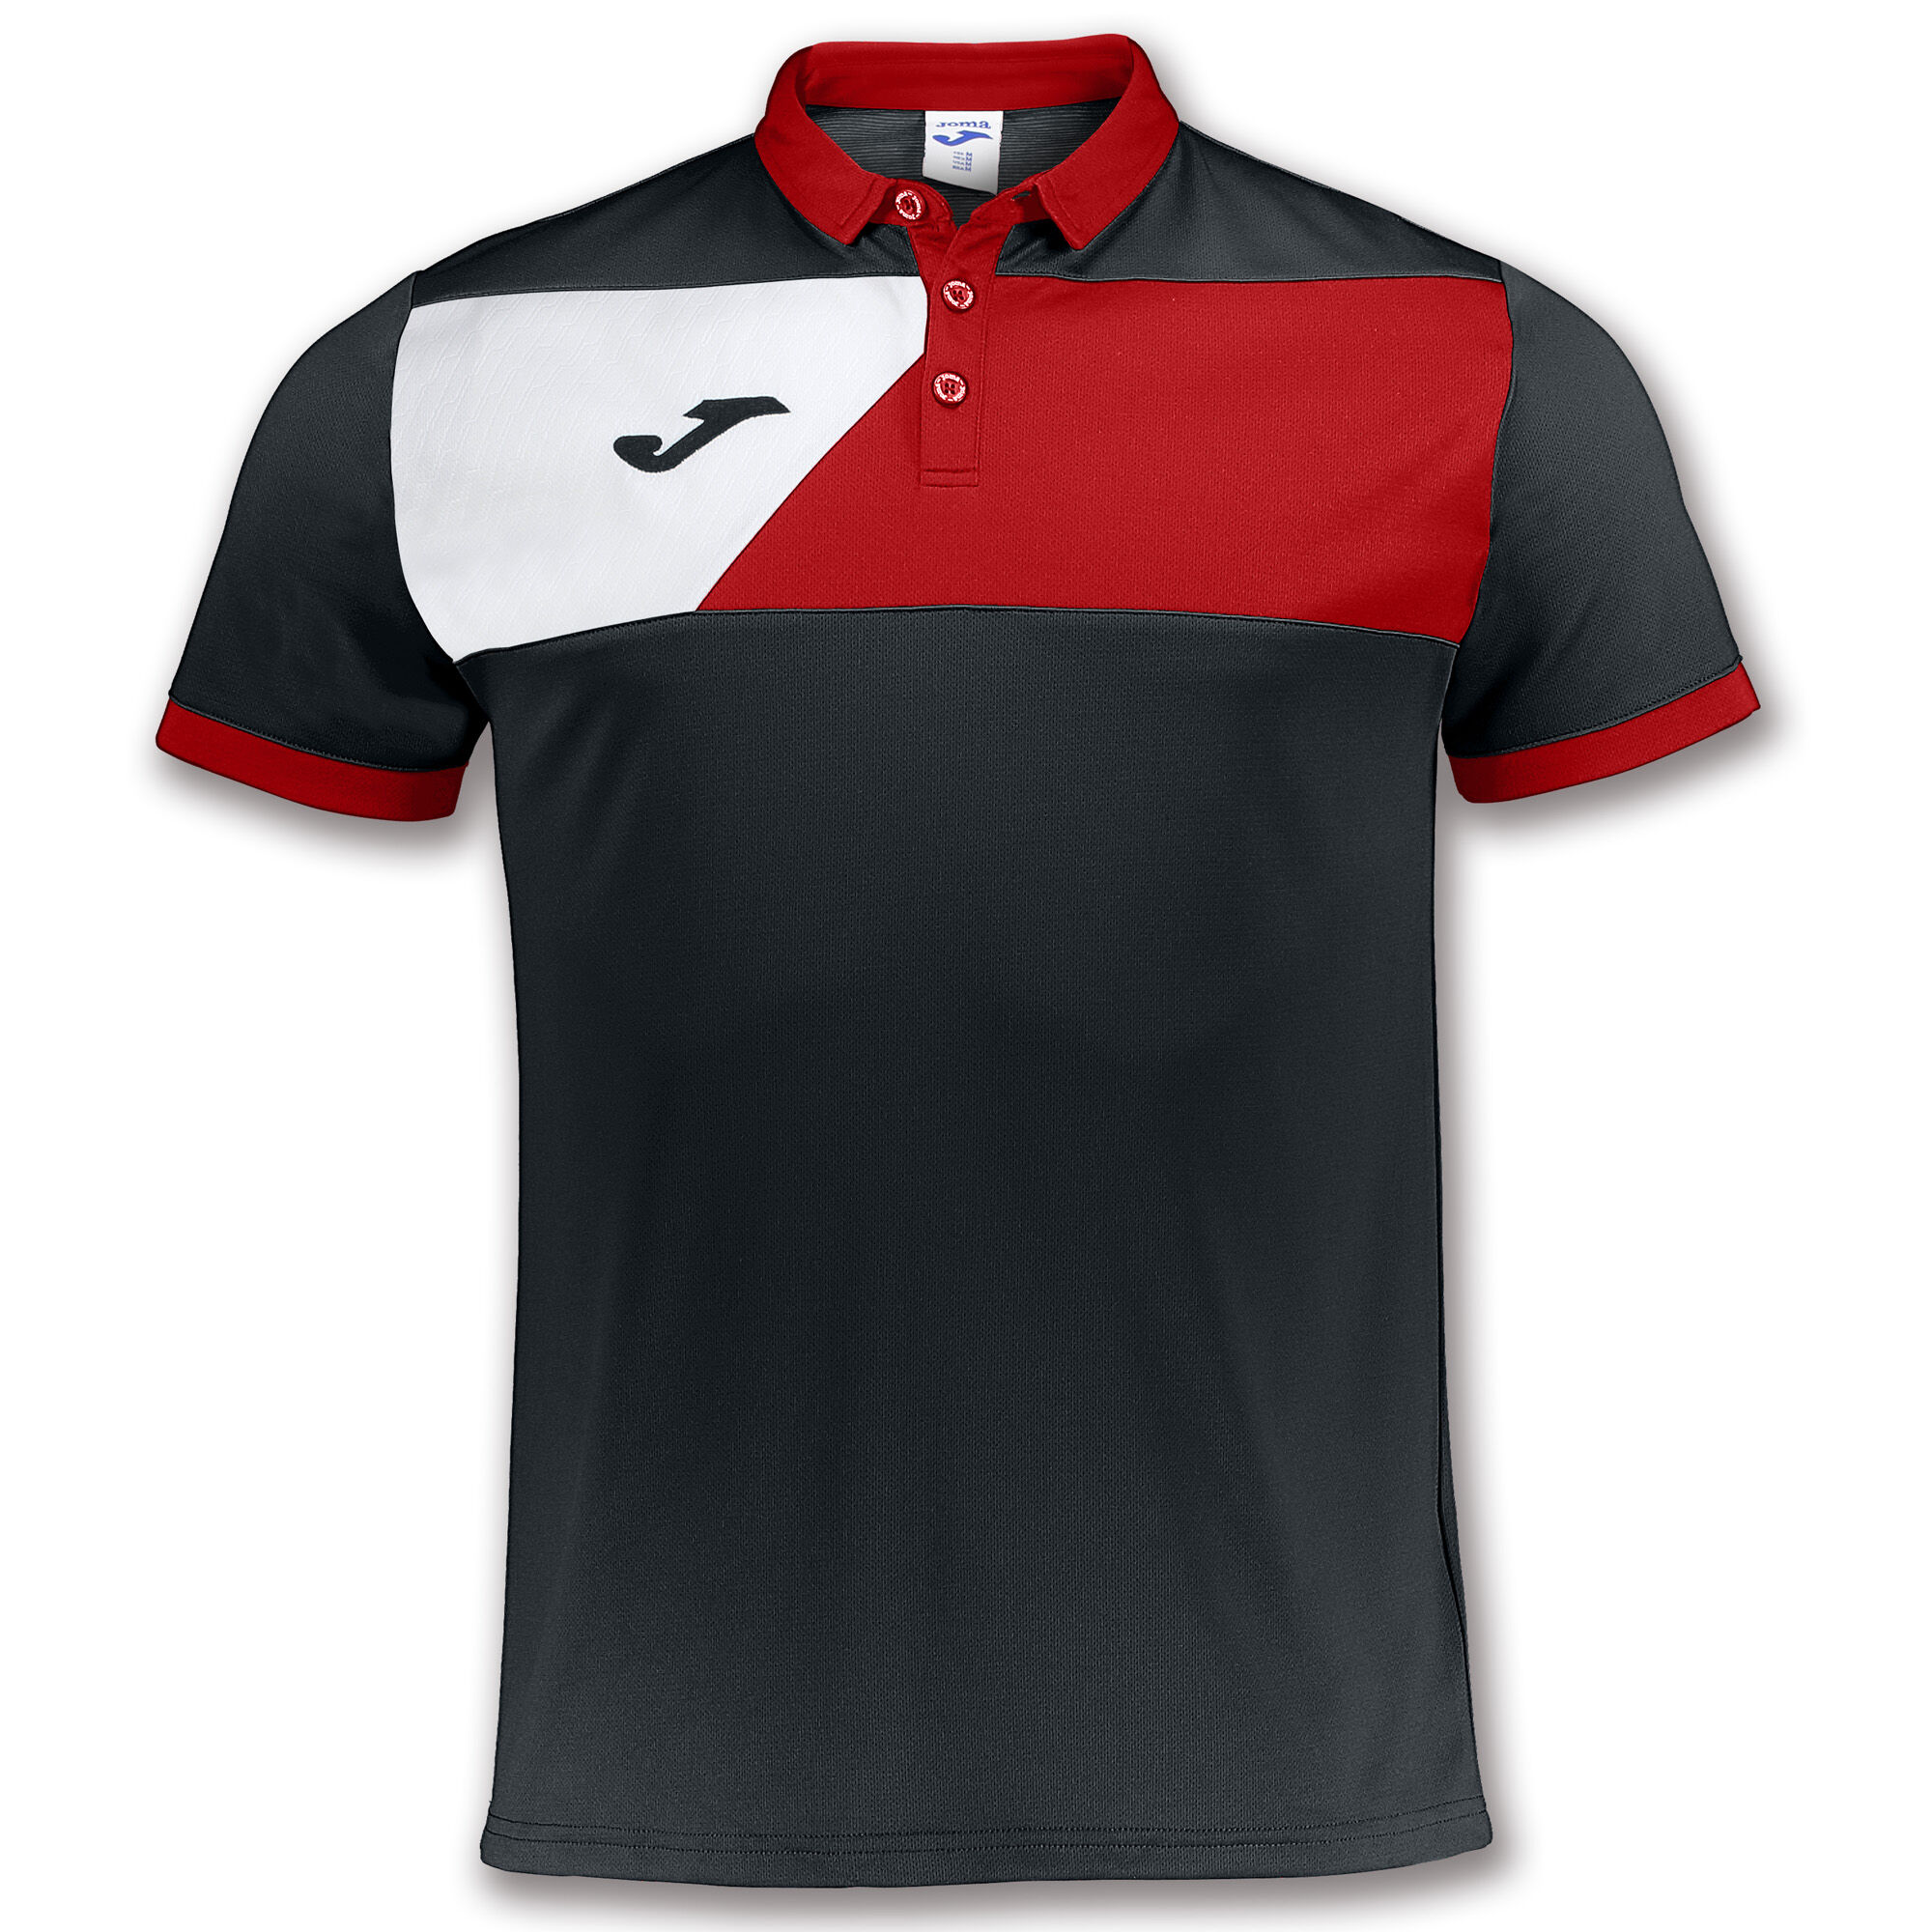 POLO MANCHES COURTES HOMME CREW II NOIR ROUGE